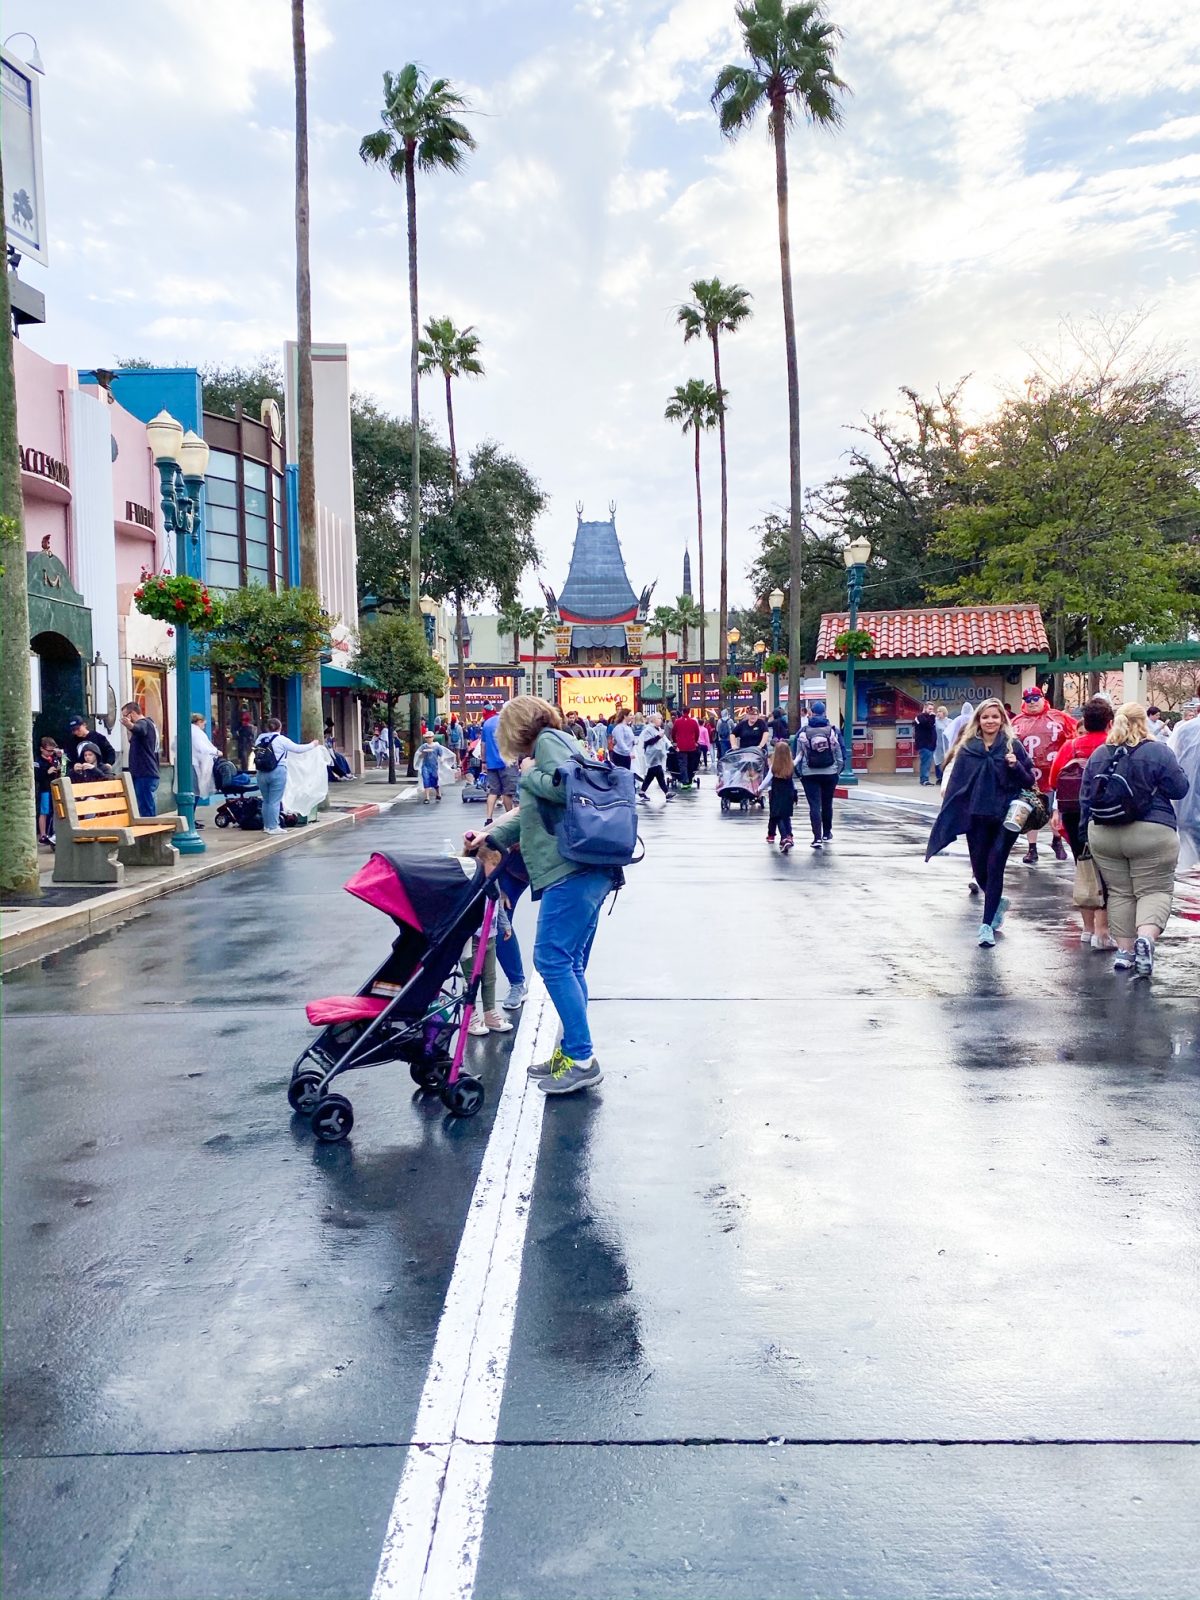 In this photo, a woman pushes a stroller through Hollywood Studios: strollers at Disney help navigate large walking spaces in parks like this one.